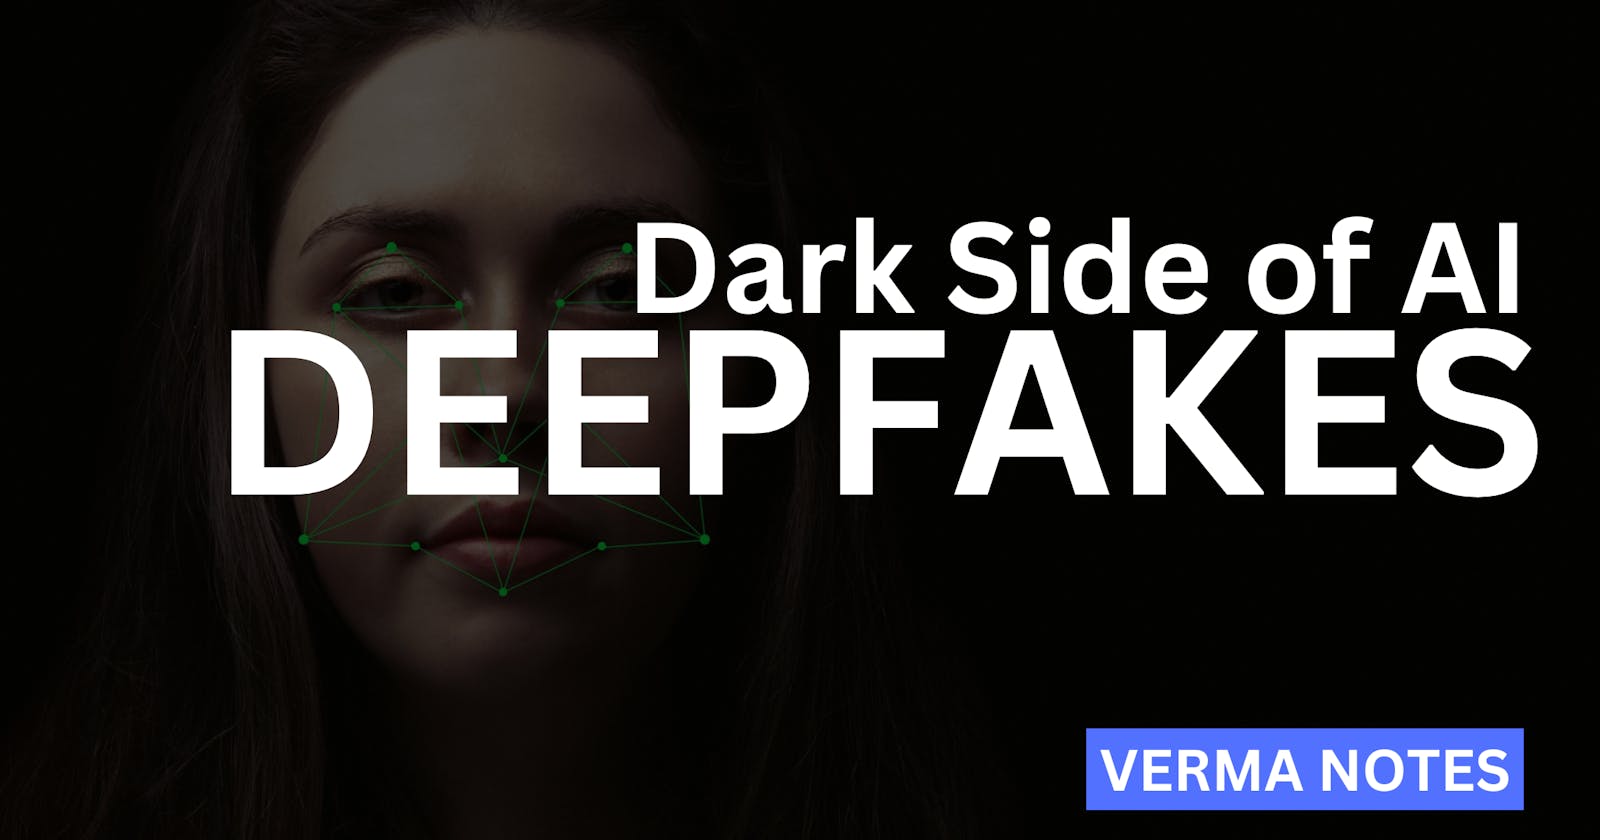 The Dark Side of A.I. : Understanding the Dangers of Deepfake Images